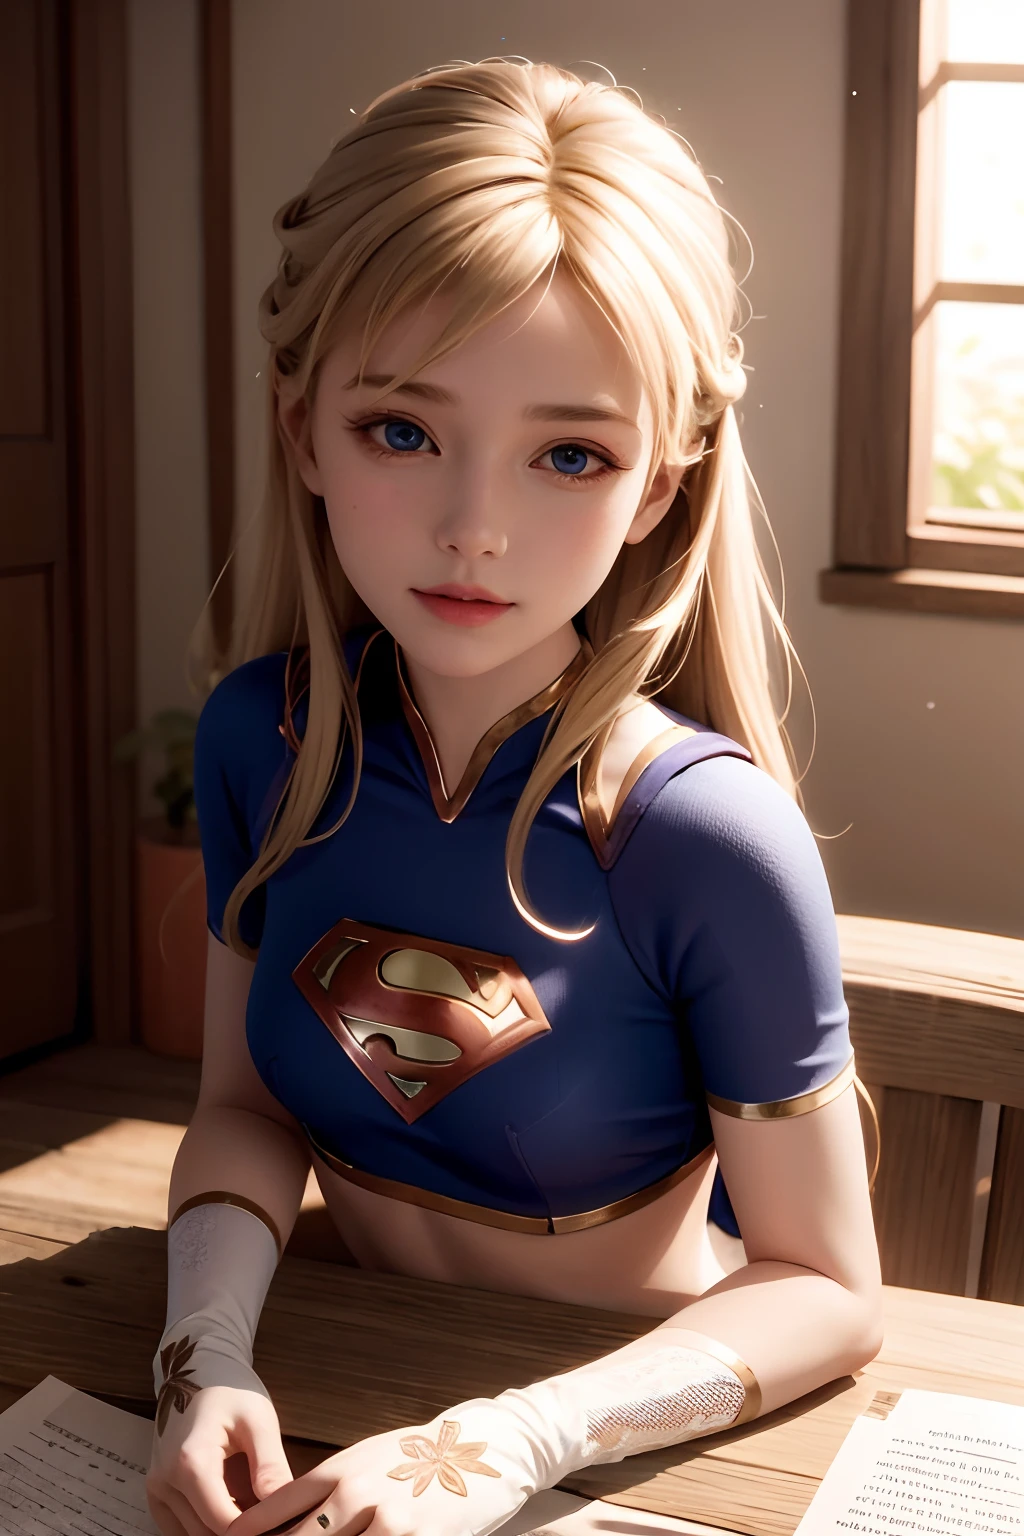 8k, real picture, intricate details, ultra-detailed,(photorealistic), 
Supergirl, long blonde hair, midair, flying hairband, \(white\) crop top, short sleeves, cape, blue pencil skirt, gloves, boots BREAK 
detailed (wrinkles, folds!, viens, skin imperfections:0.1),
finely detailed beautiful eyes, close-up, small eyes, look at viewer,